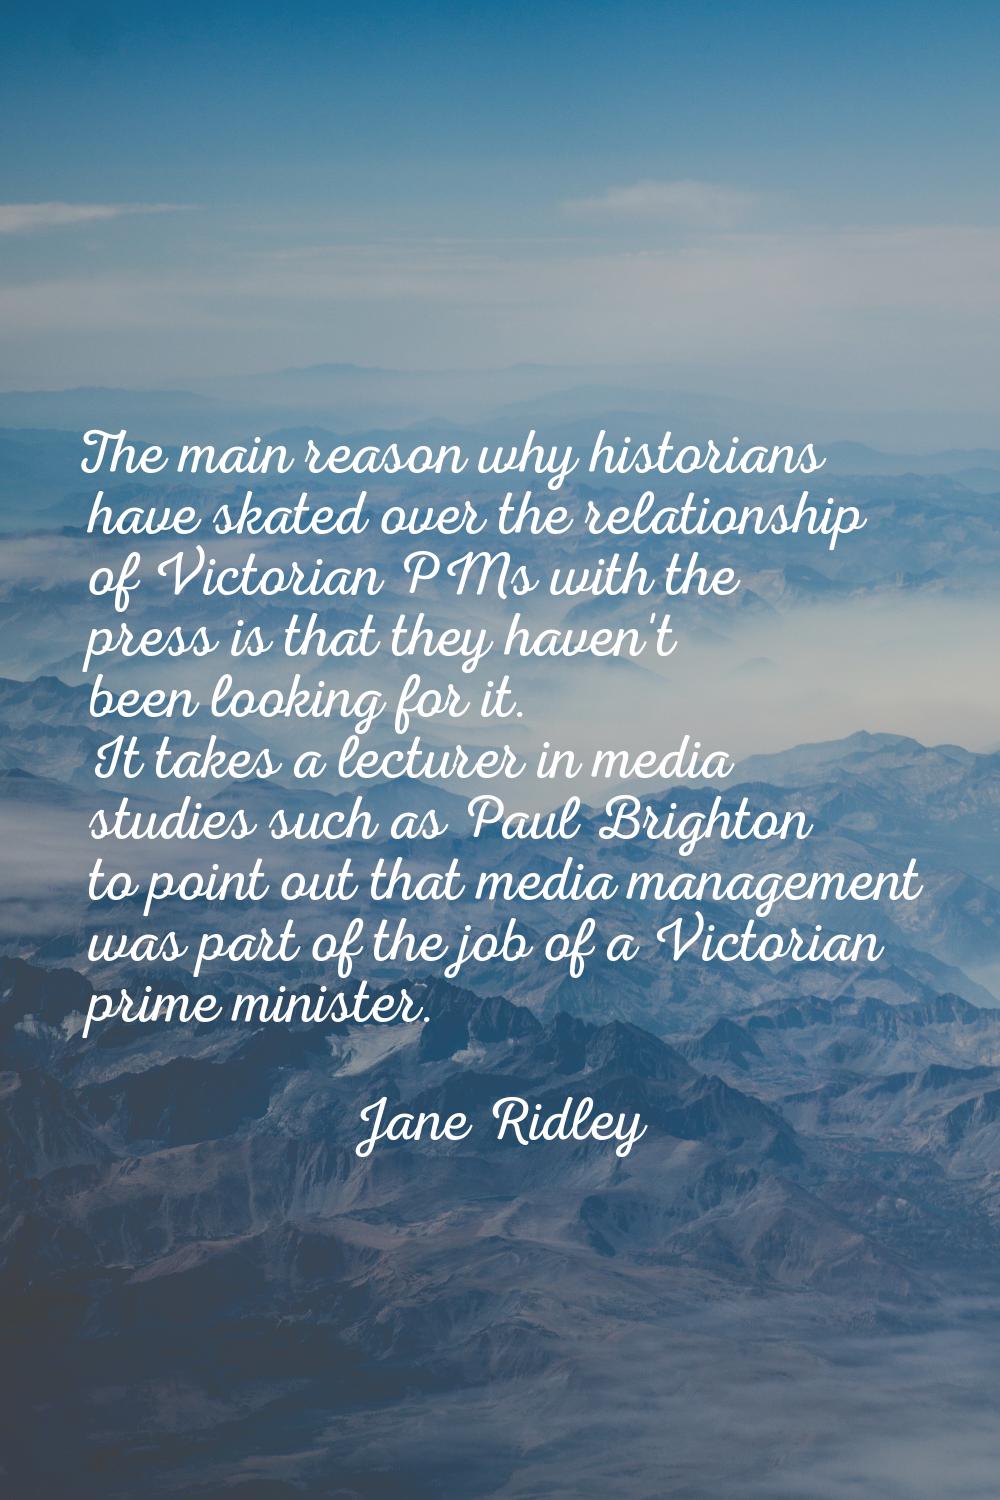 The main reason why historians have skated over the relationship of Victorian PMs with the press is